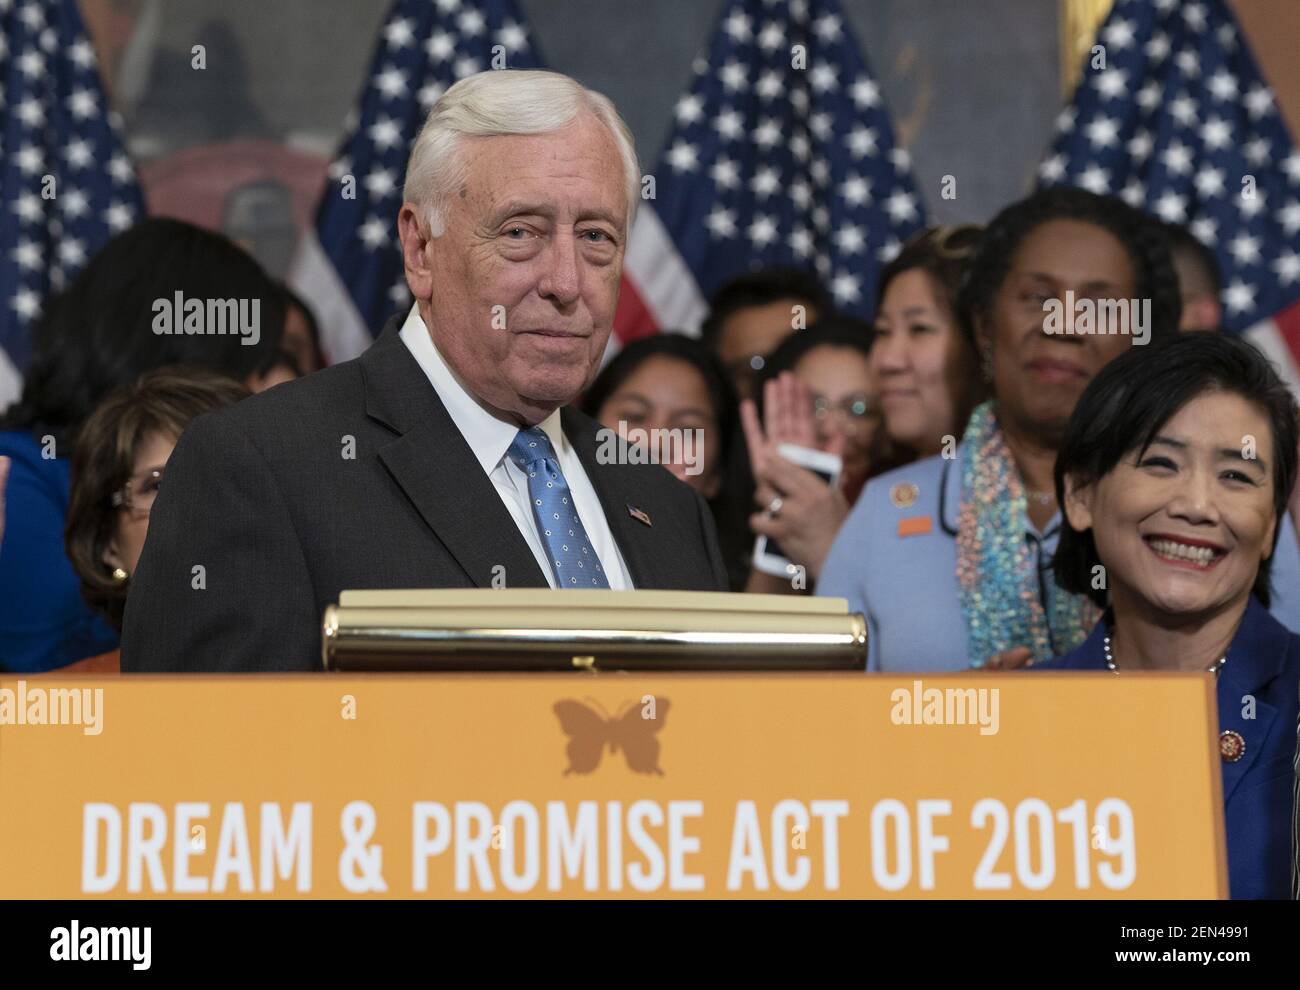 United States House Majority Leader Steny Hoyer (Democrat of Maryland) participates in a rally with House Democrats on the American Dream and Promise Act on Capitol Hill in Washington, DC, June 4, 2019. (Photo by Chris Kleponis /CNP/Sipa USA) Stock Photo